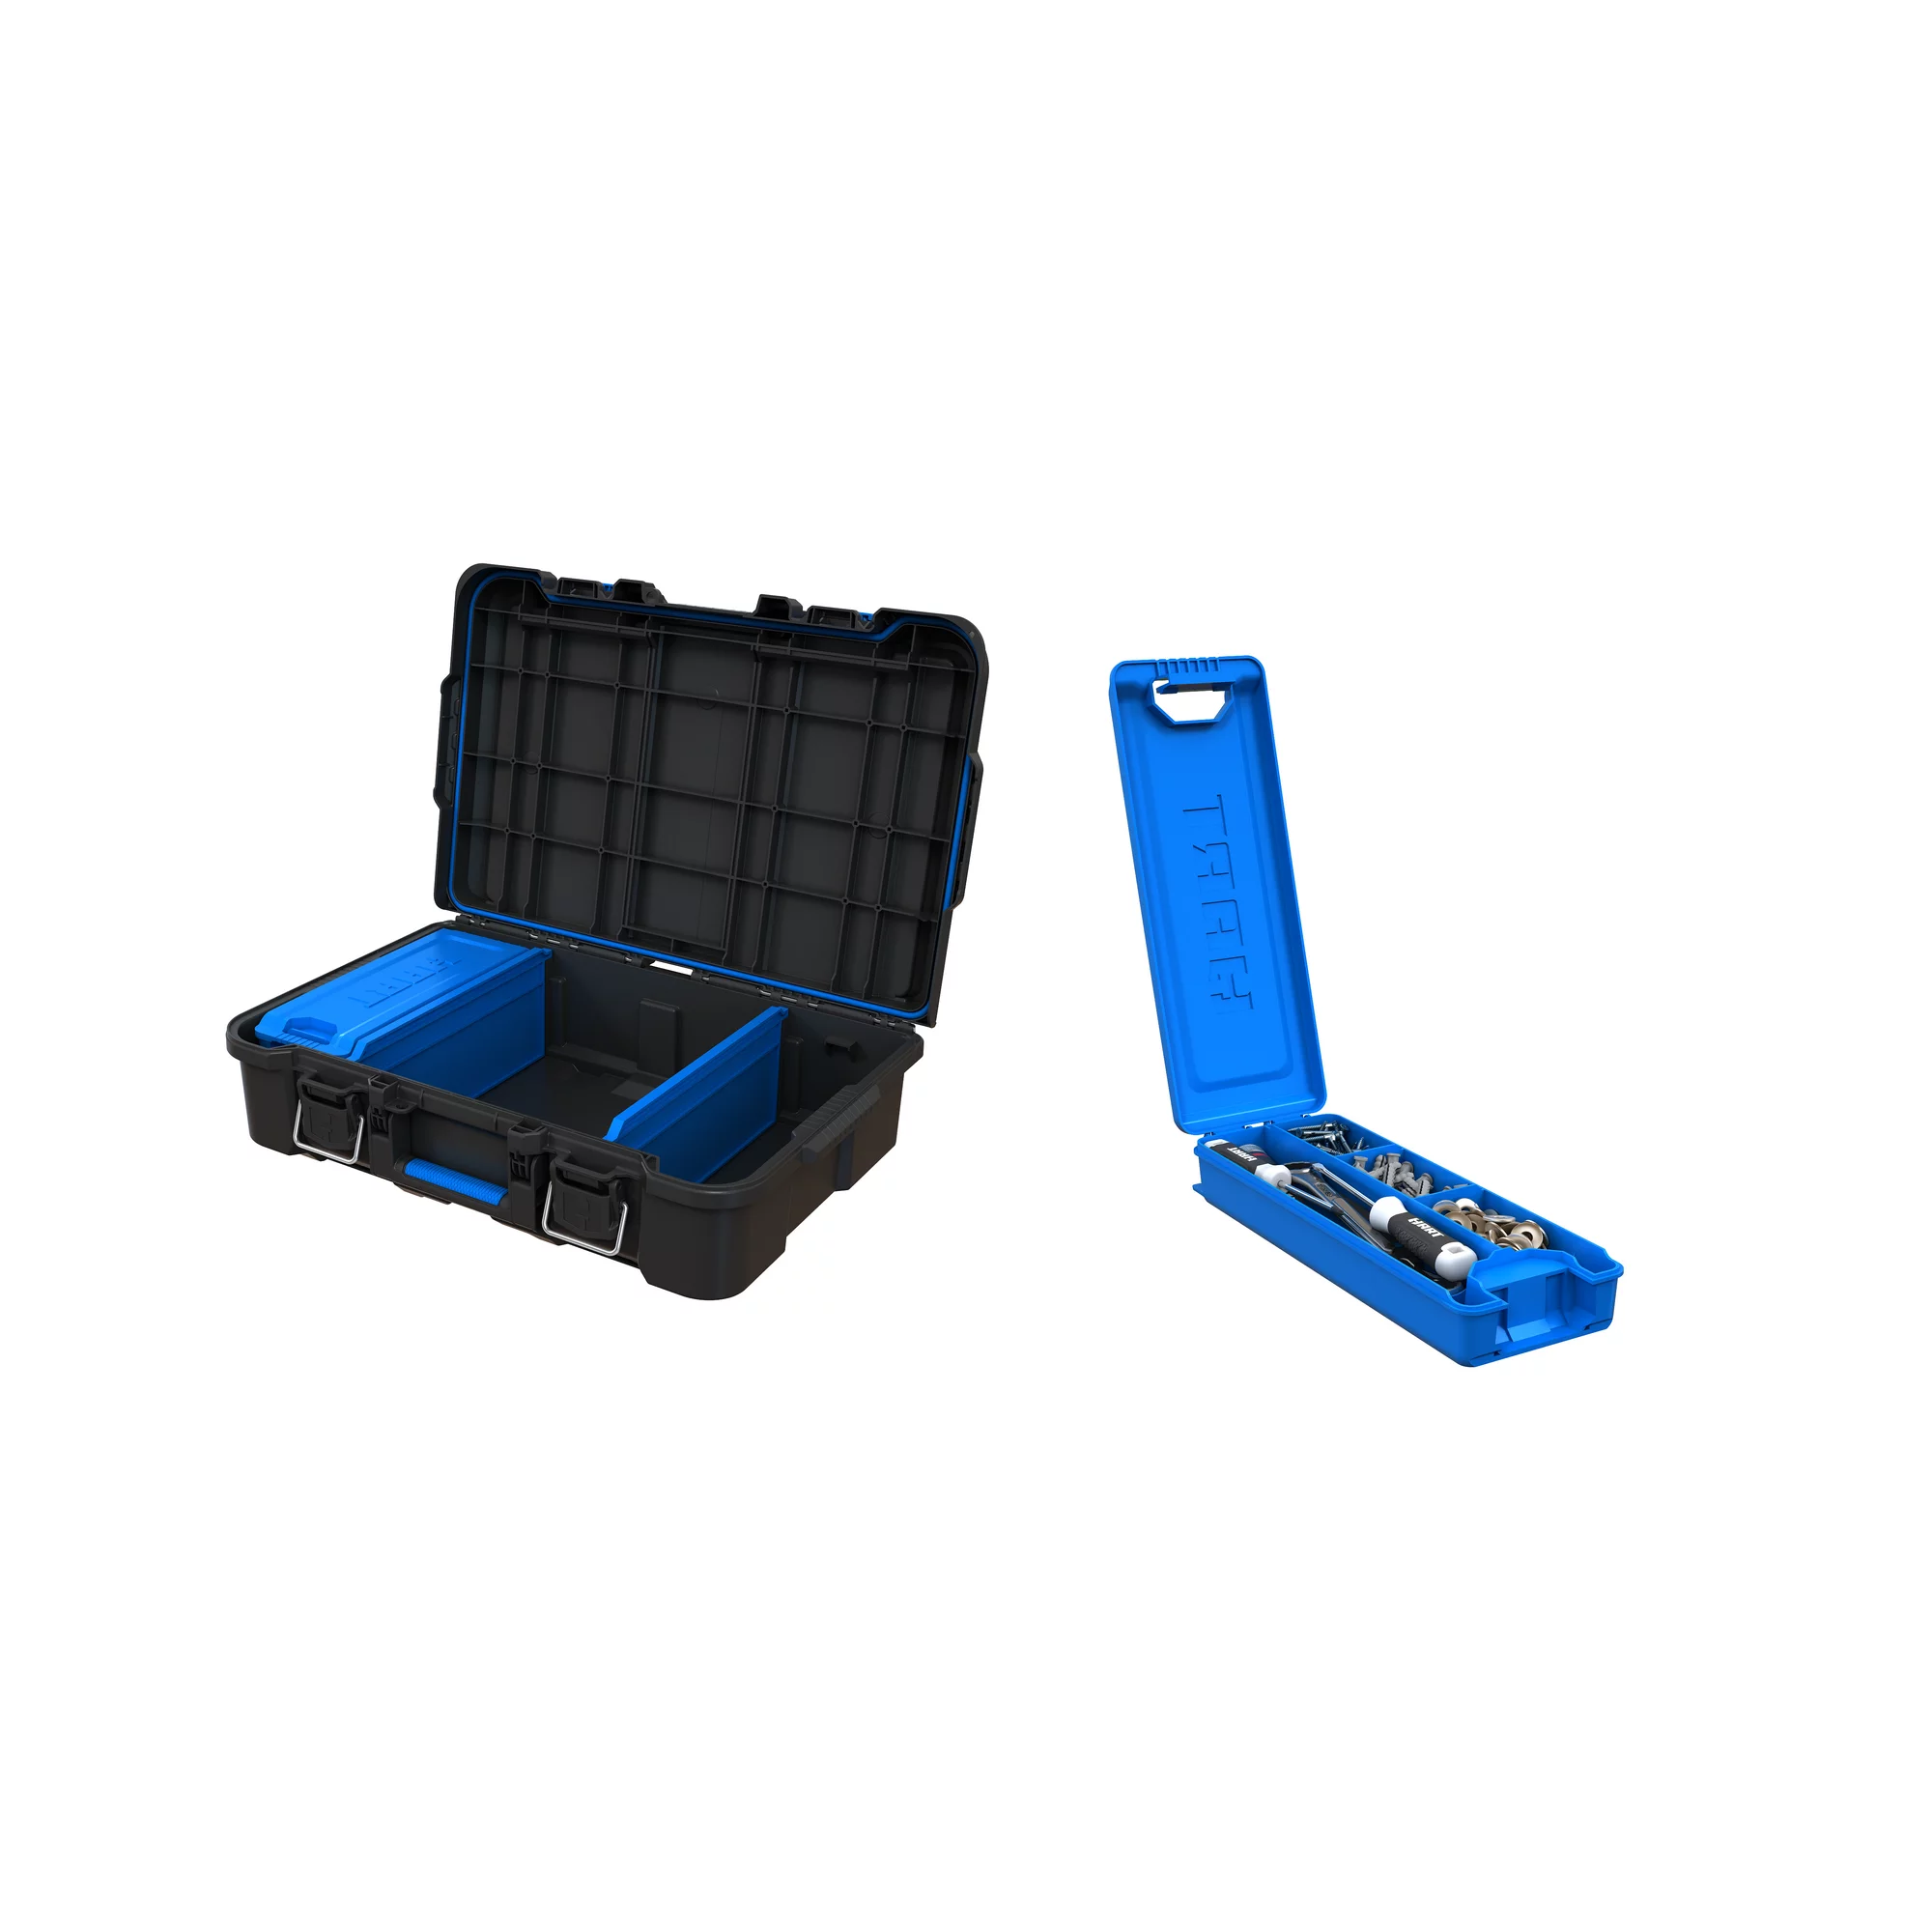 HART 252719 Stack System Tool Box with Small Blue Organizer & Dividers,  Fits HART's Modular Storage System –